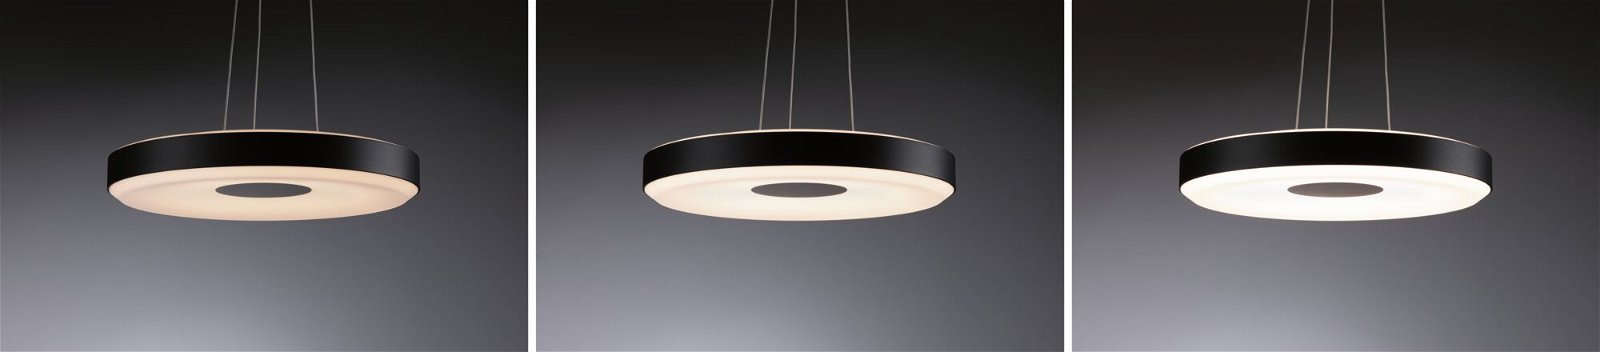 LED Pendant luminaire Smart Home Zigbee 3.0 Puric Pane 2700K 1.200lm / 700lm 11 / 1x7W Black/Grey dimmable